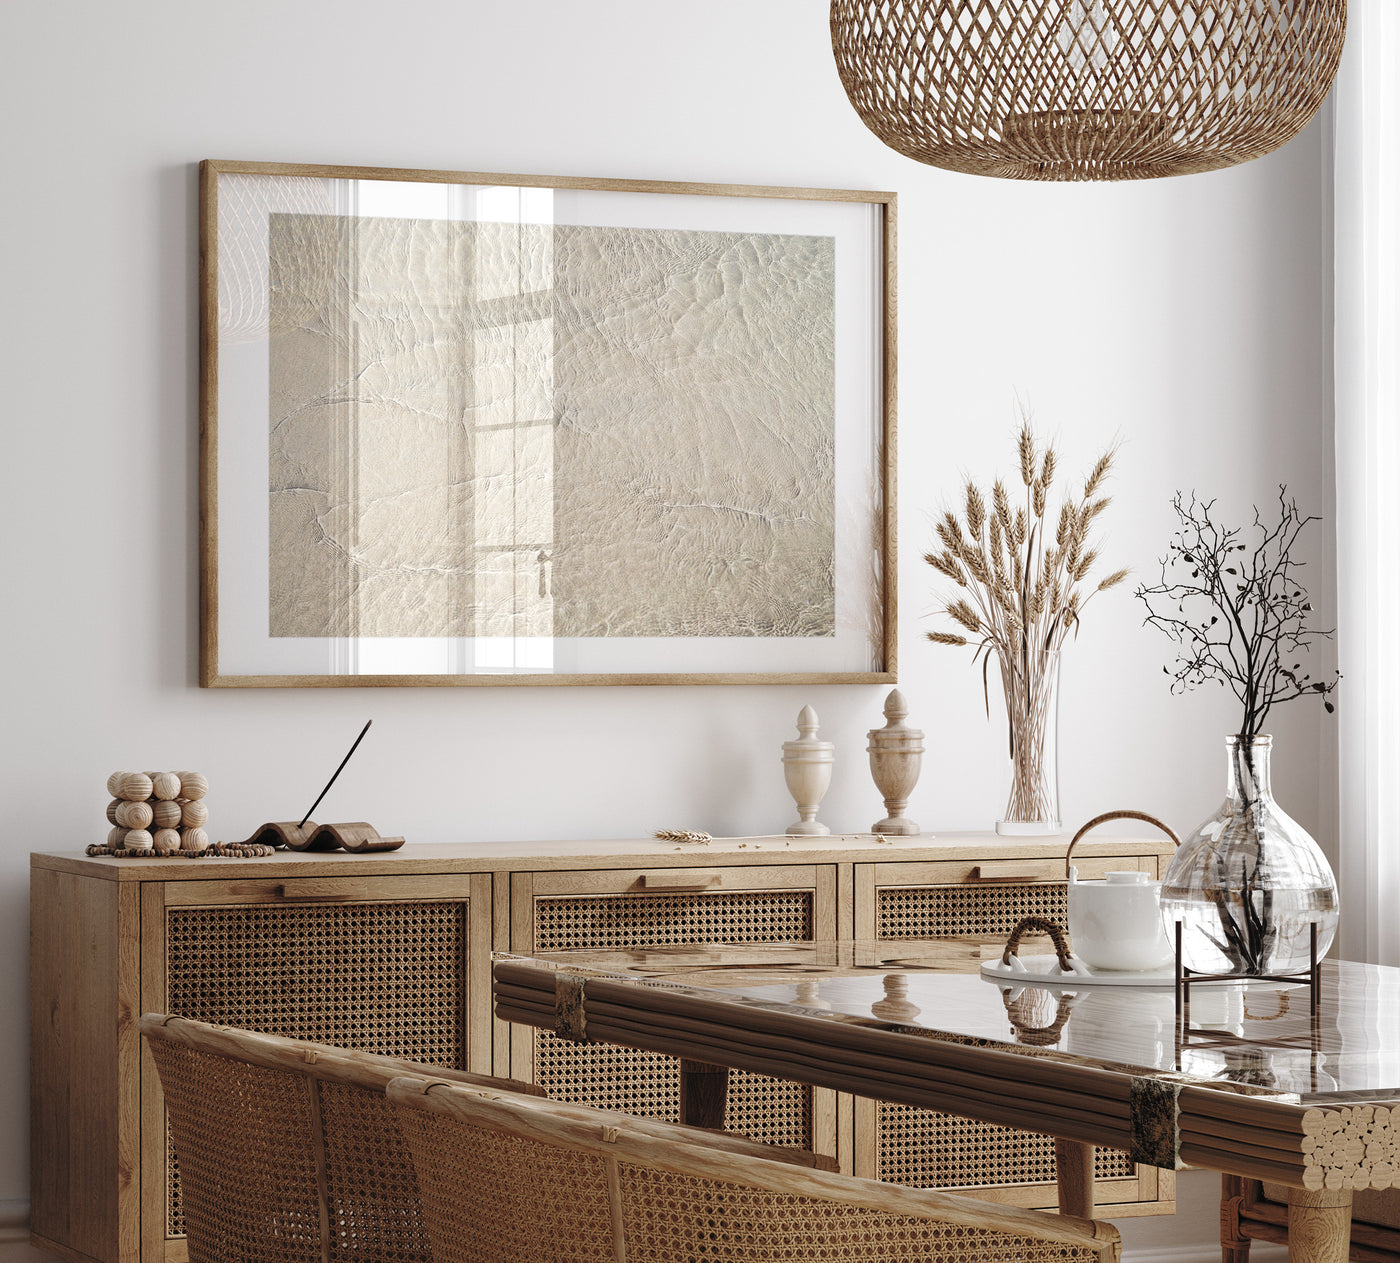 Shallow Water - Large fine art print by Cattie Coyle Photography in dining room